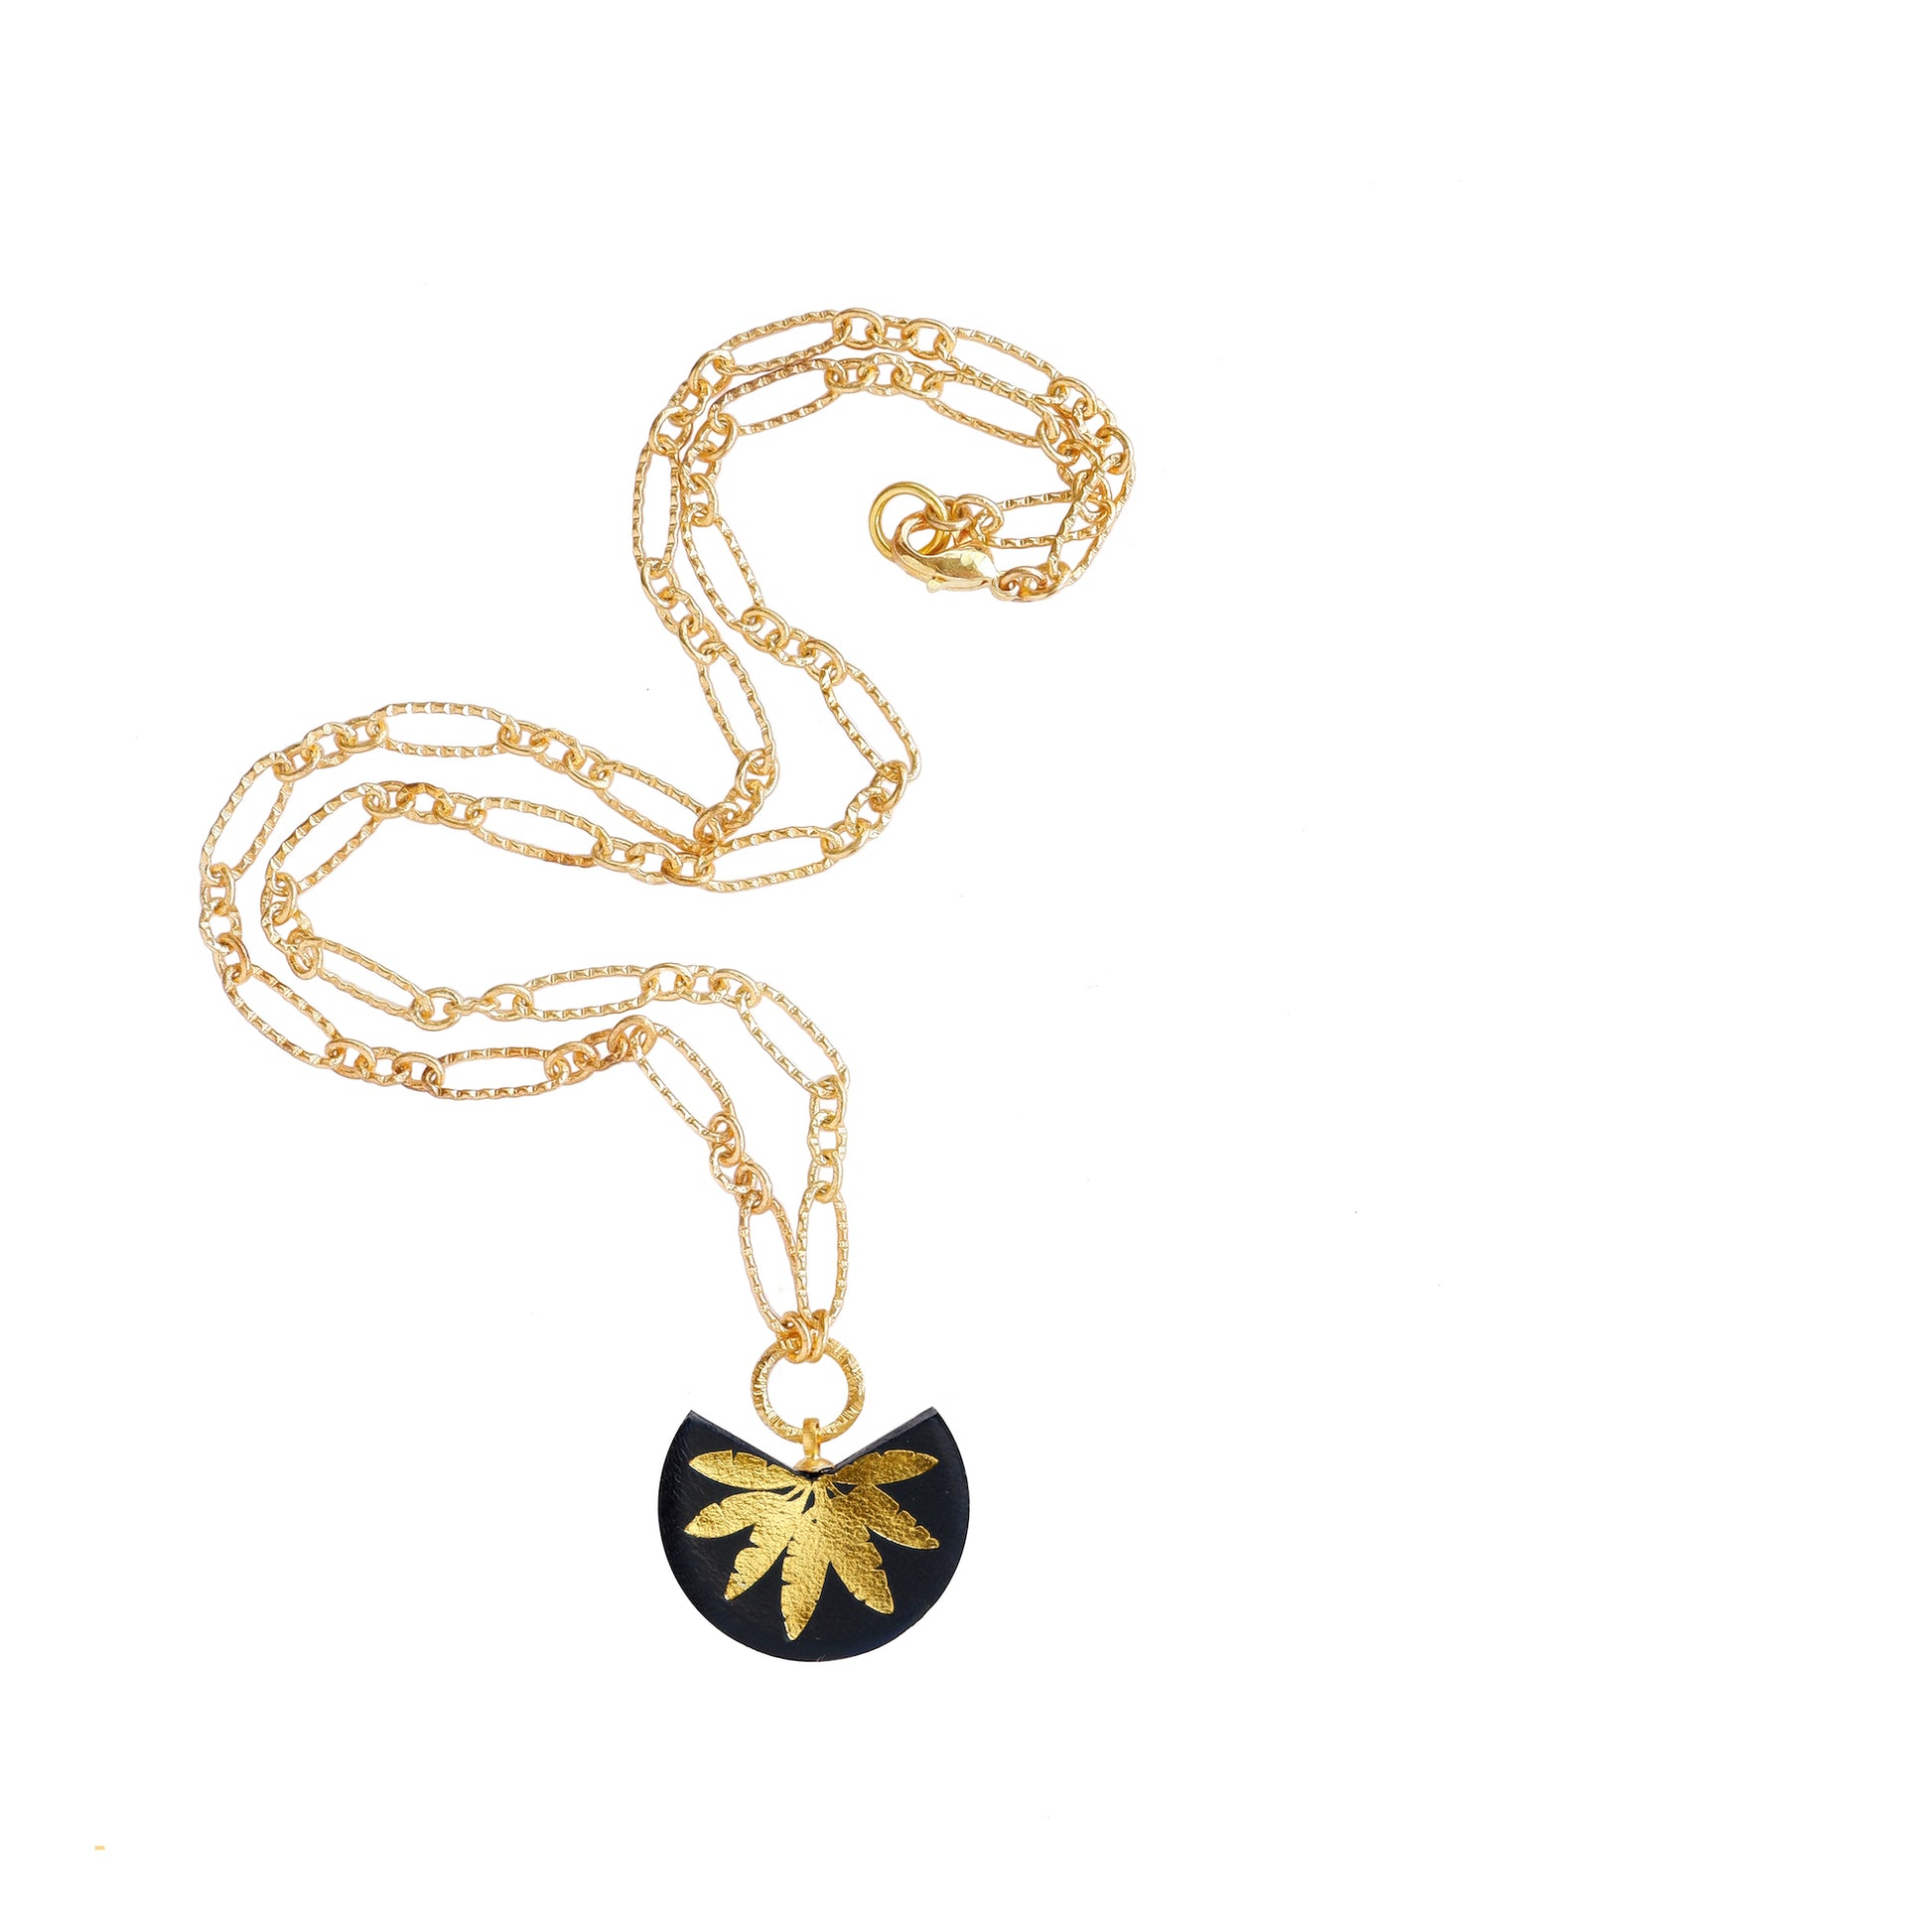 leather medallion pendant with gold palm tree print, on gold chain.